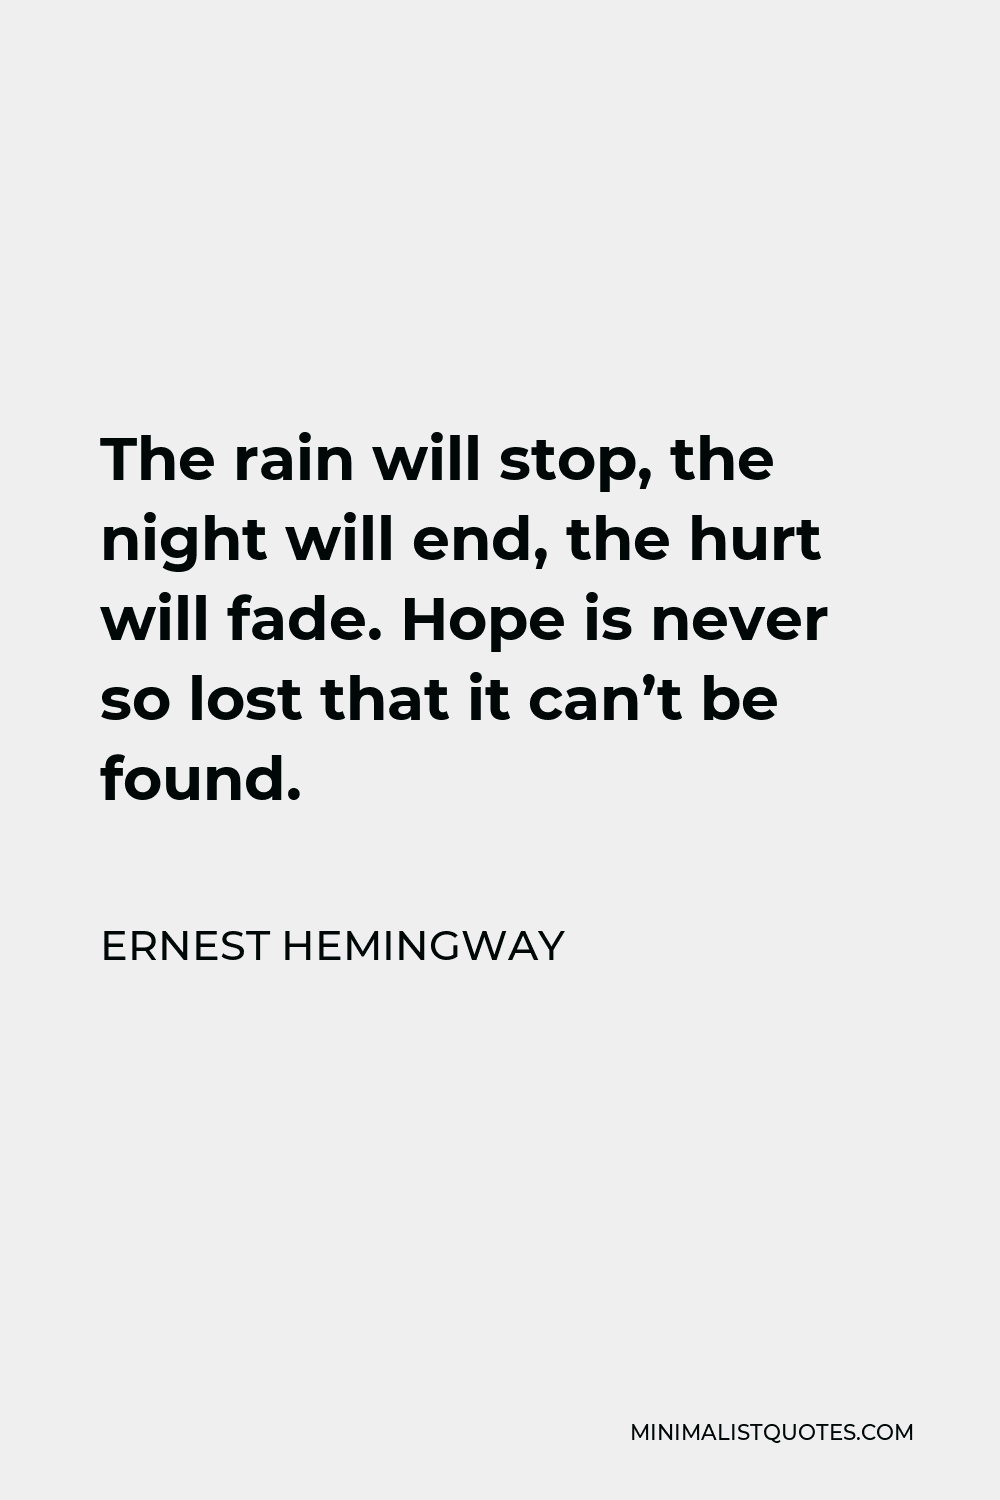 Ernest Hemingway Quote - The rain will stop, the night will end, the hurt will fade. Hope is never so lost that it can’t be found.